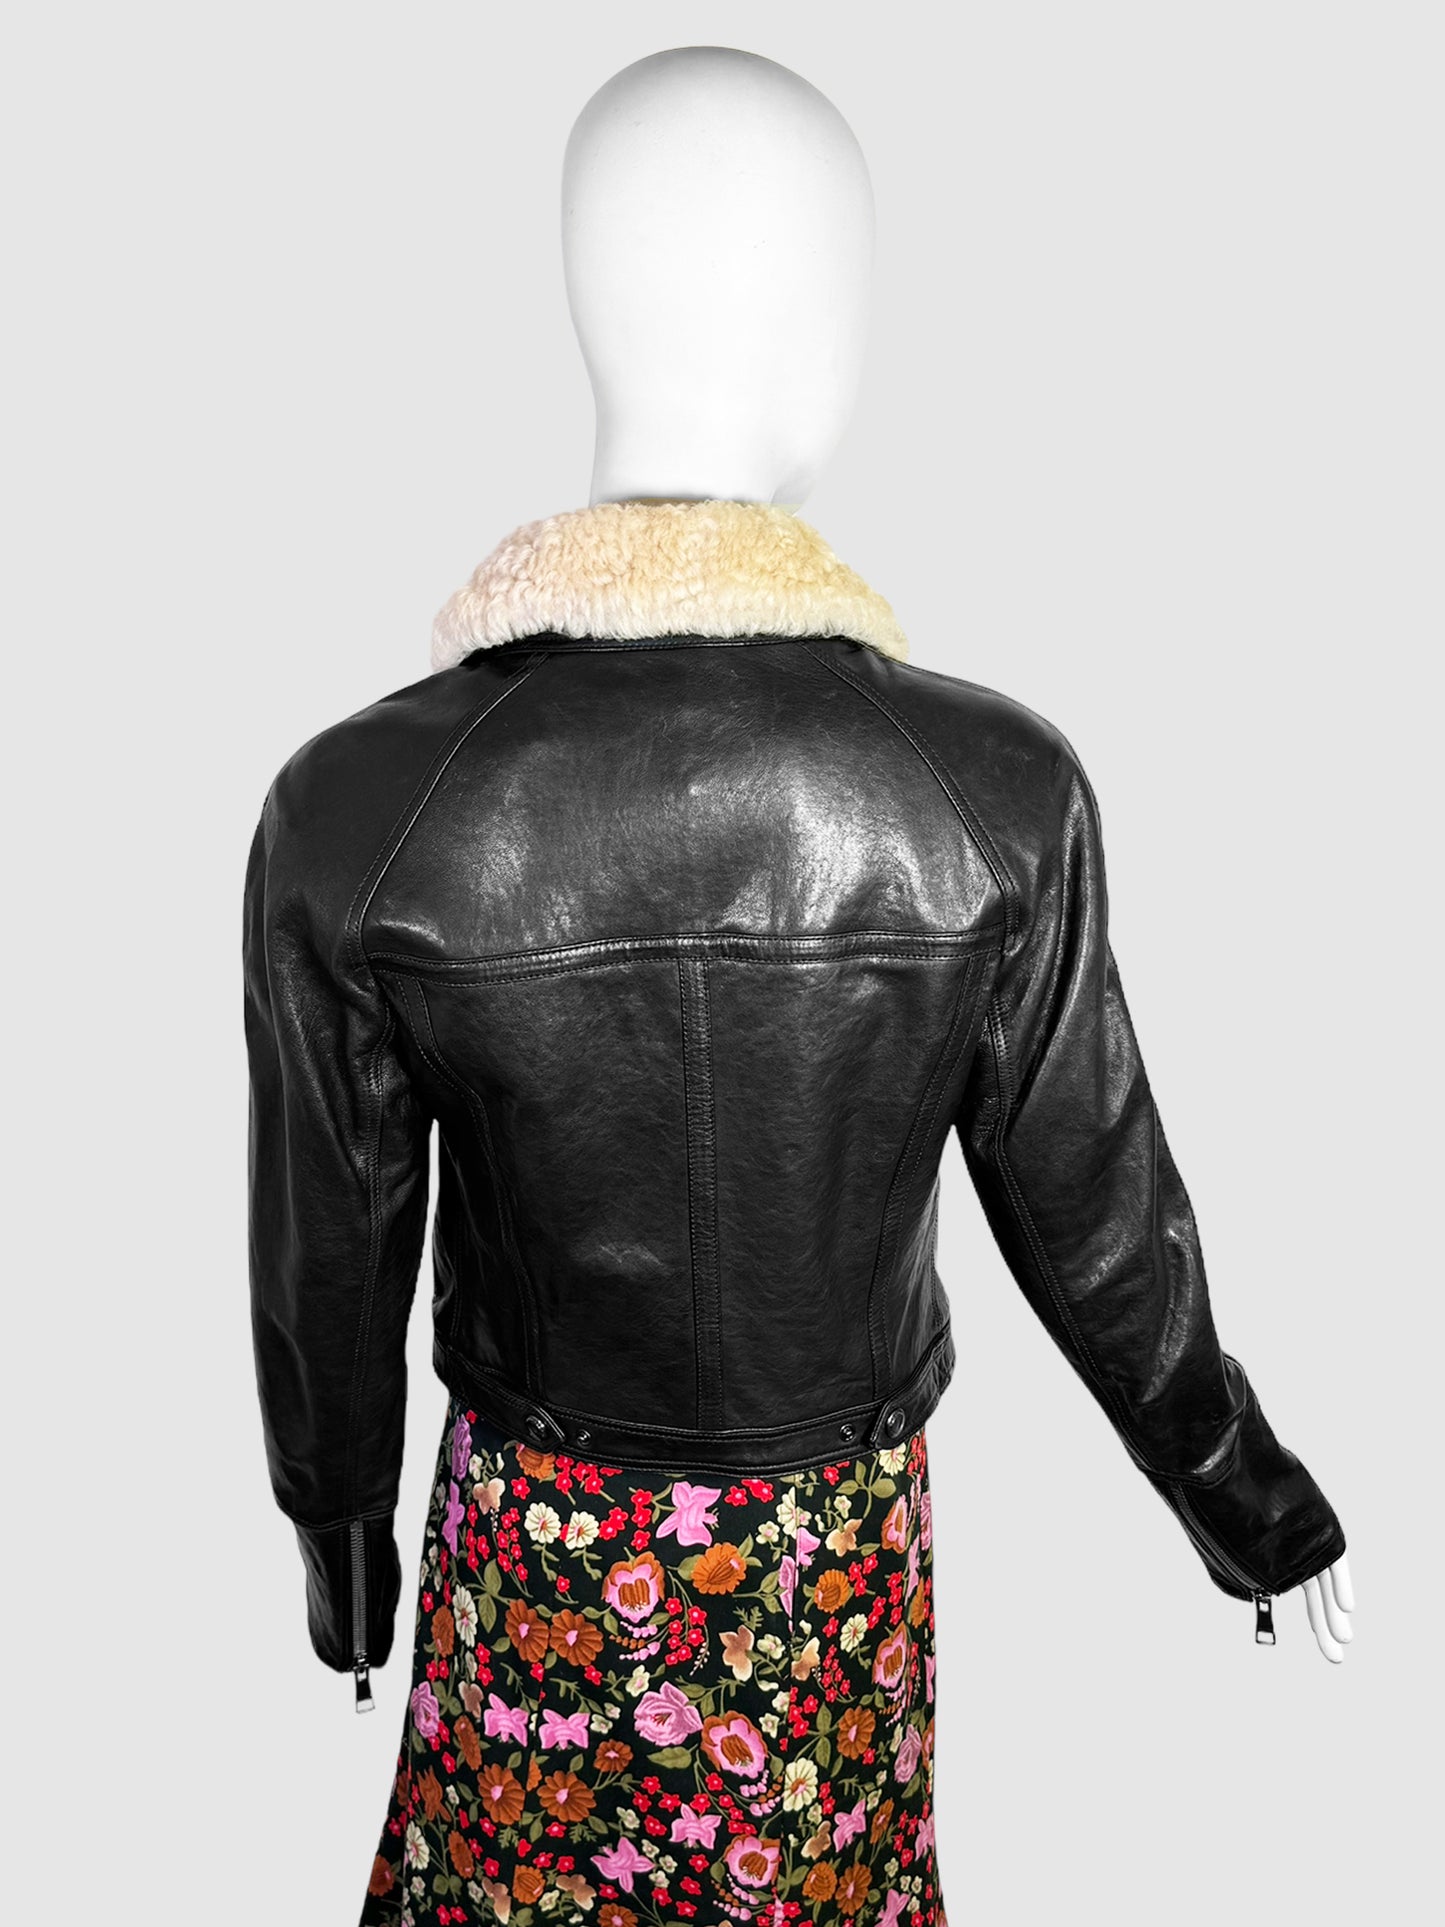 Burberry Leather Jacket with Shearling Collar - Size 8